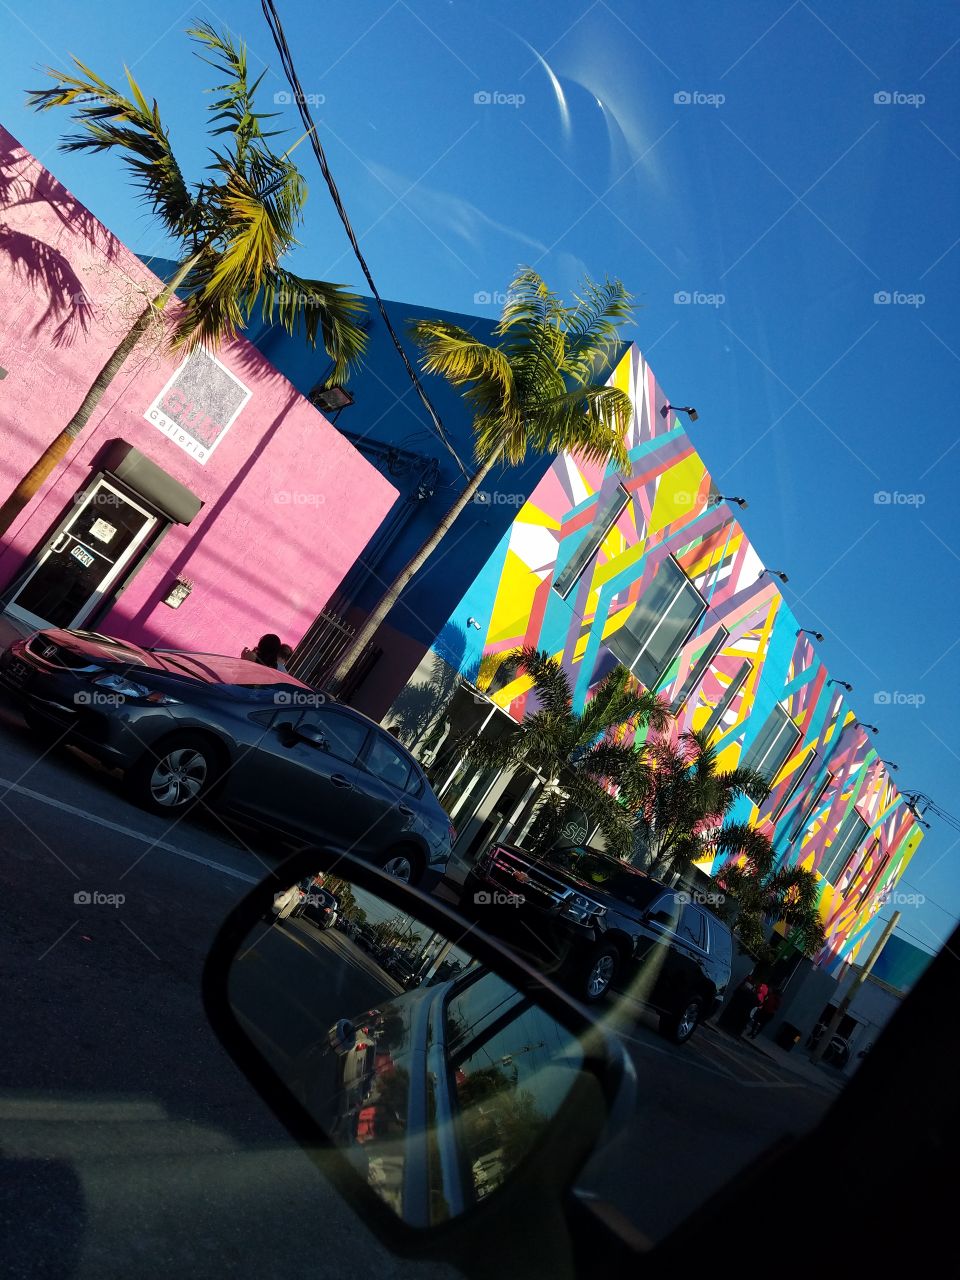 rourism in south beach